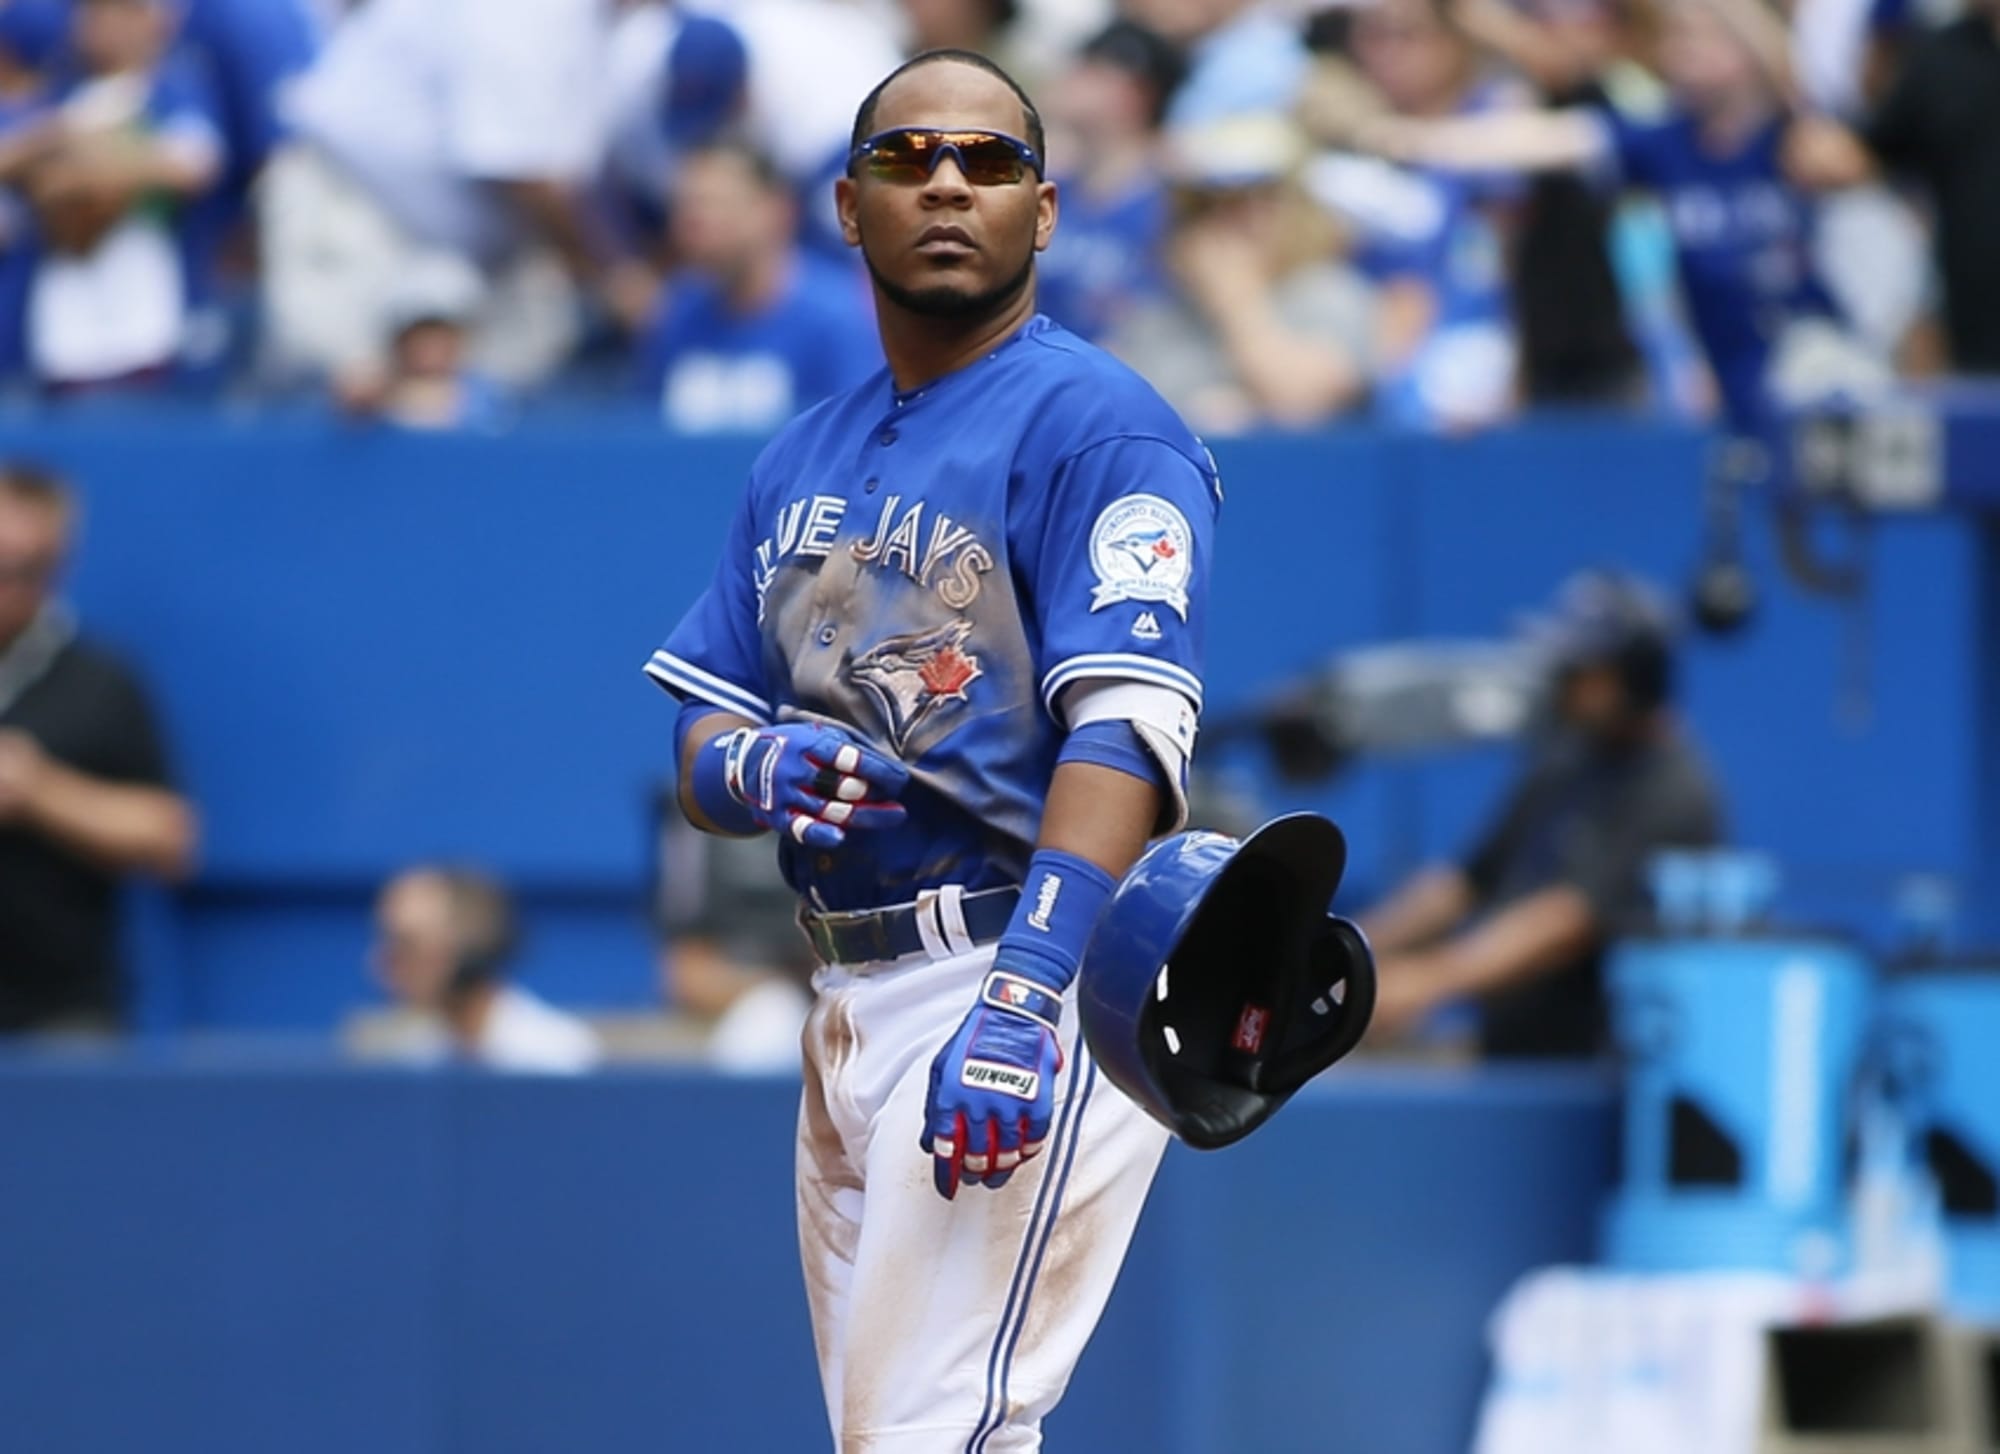 Toronto Blue Jays Top Five Current Players